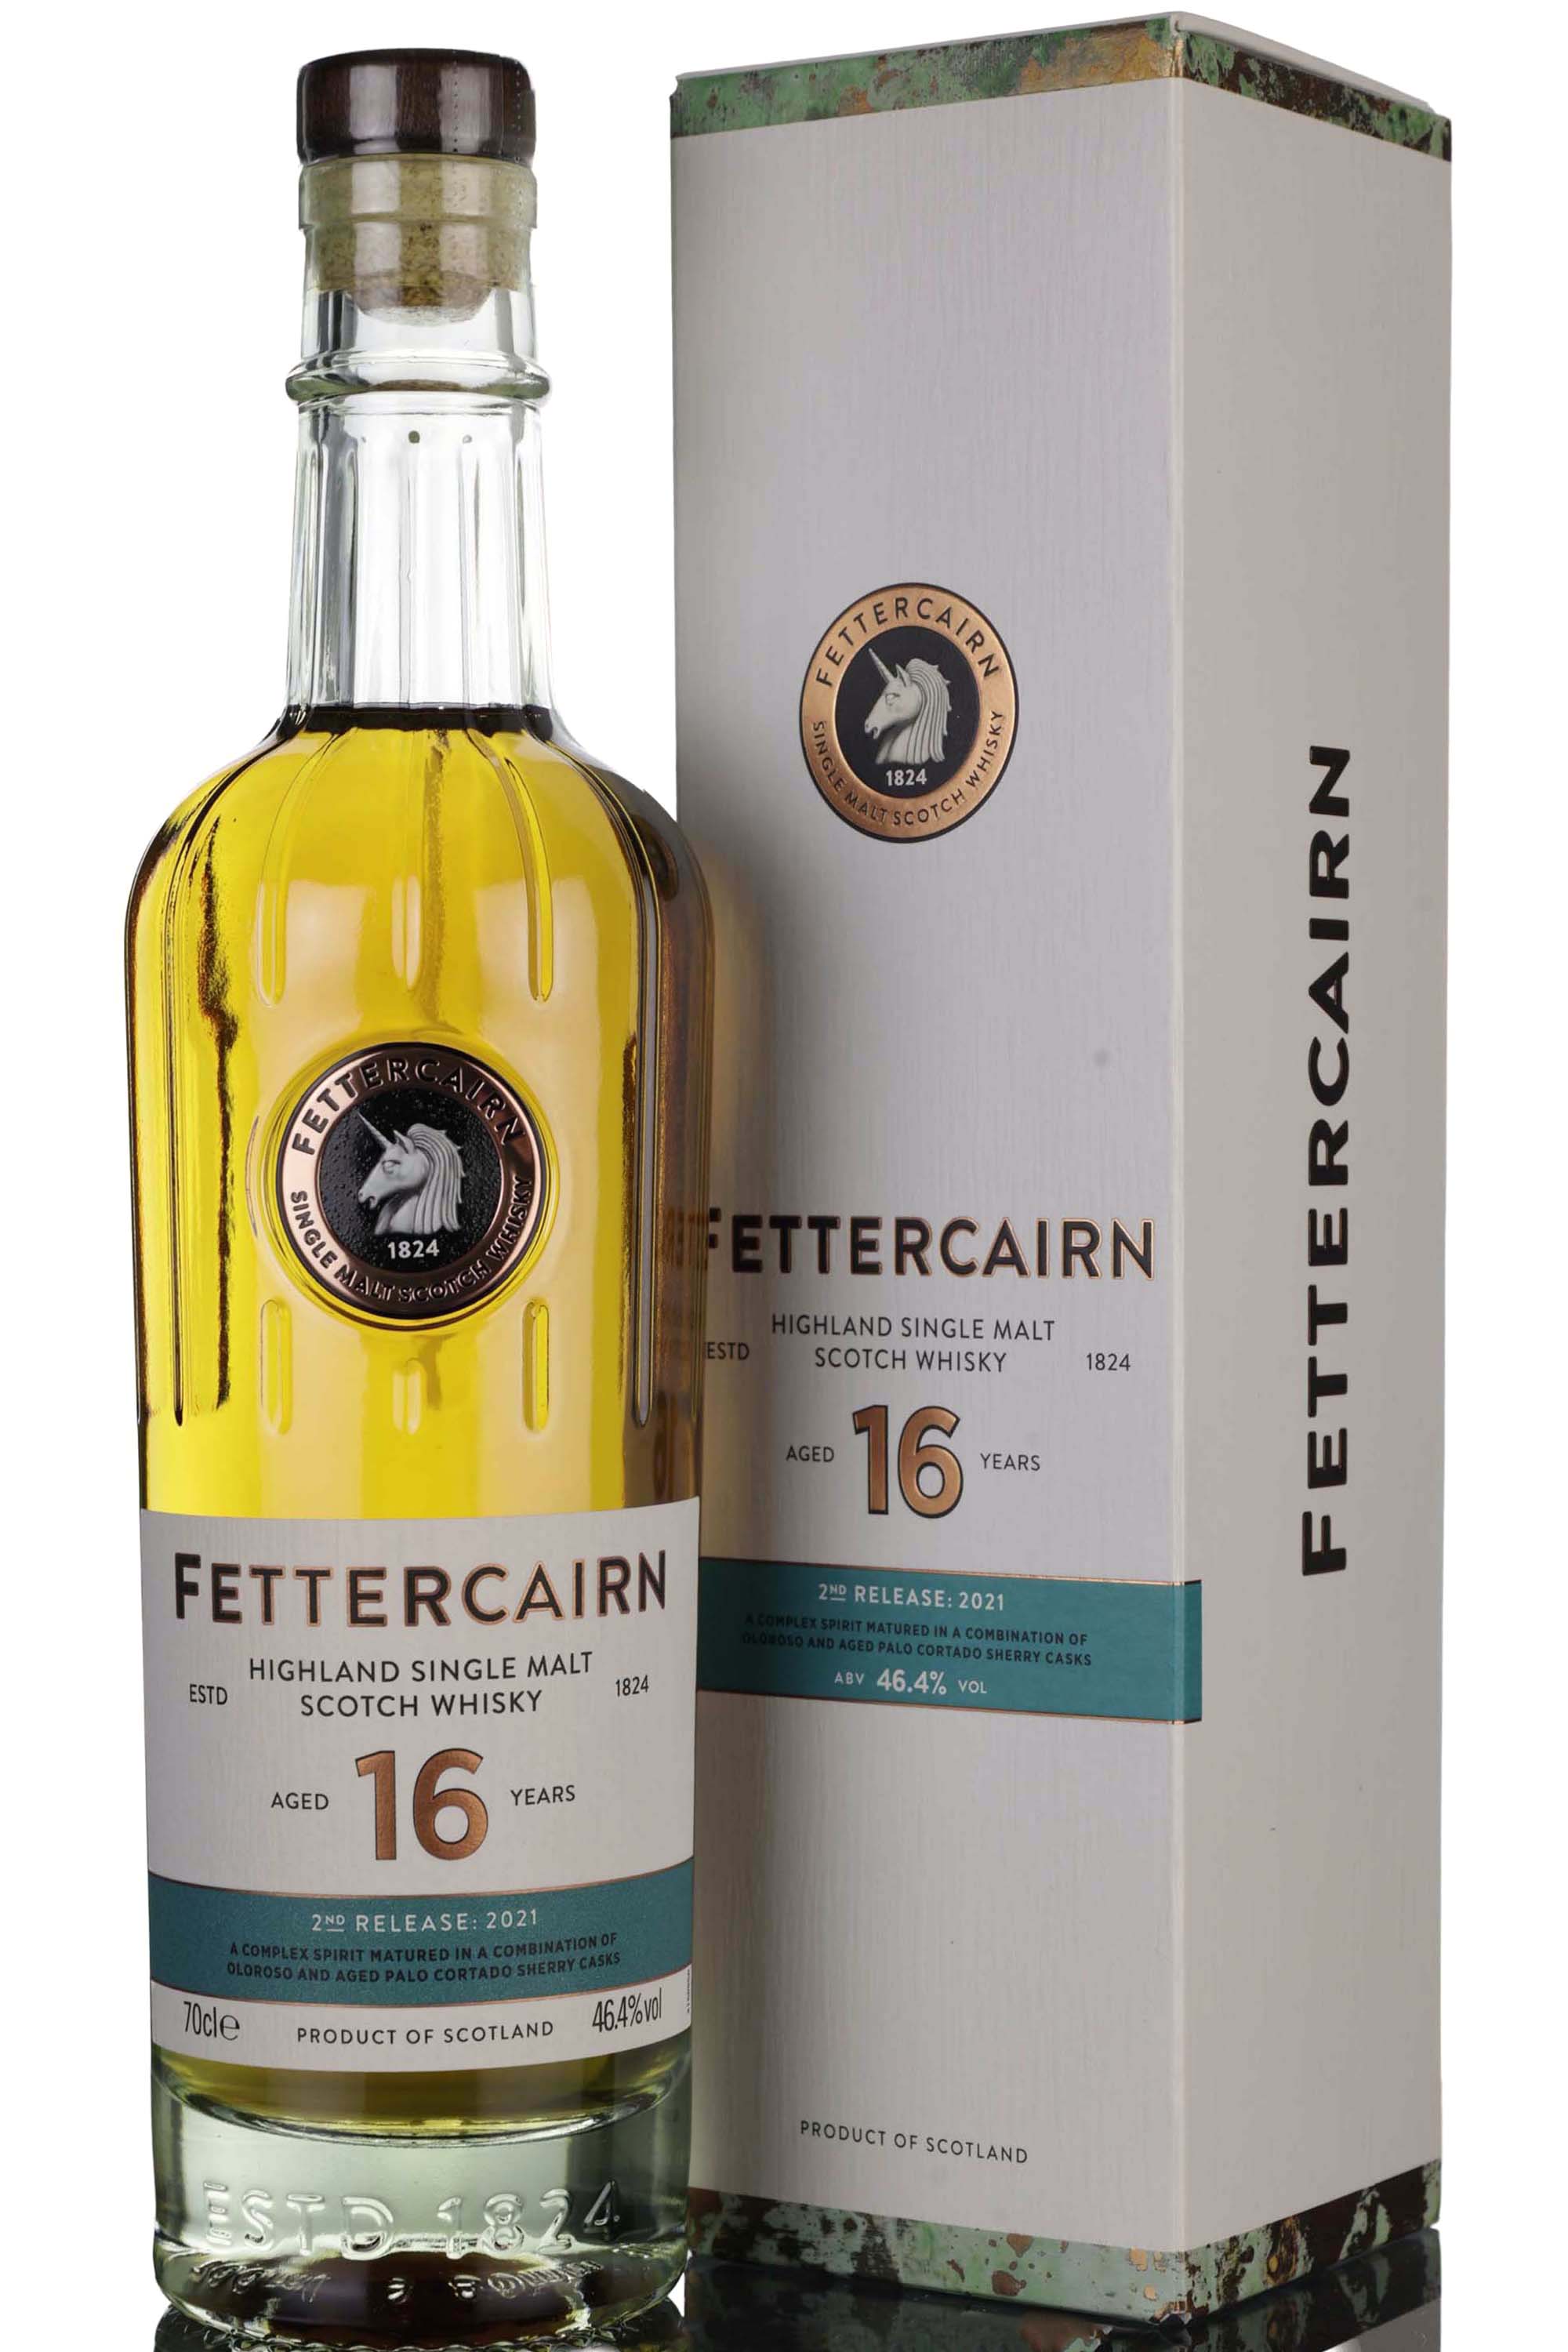 Fettercairn 16 Year Old - 2nd Release - 2021 Release